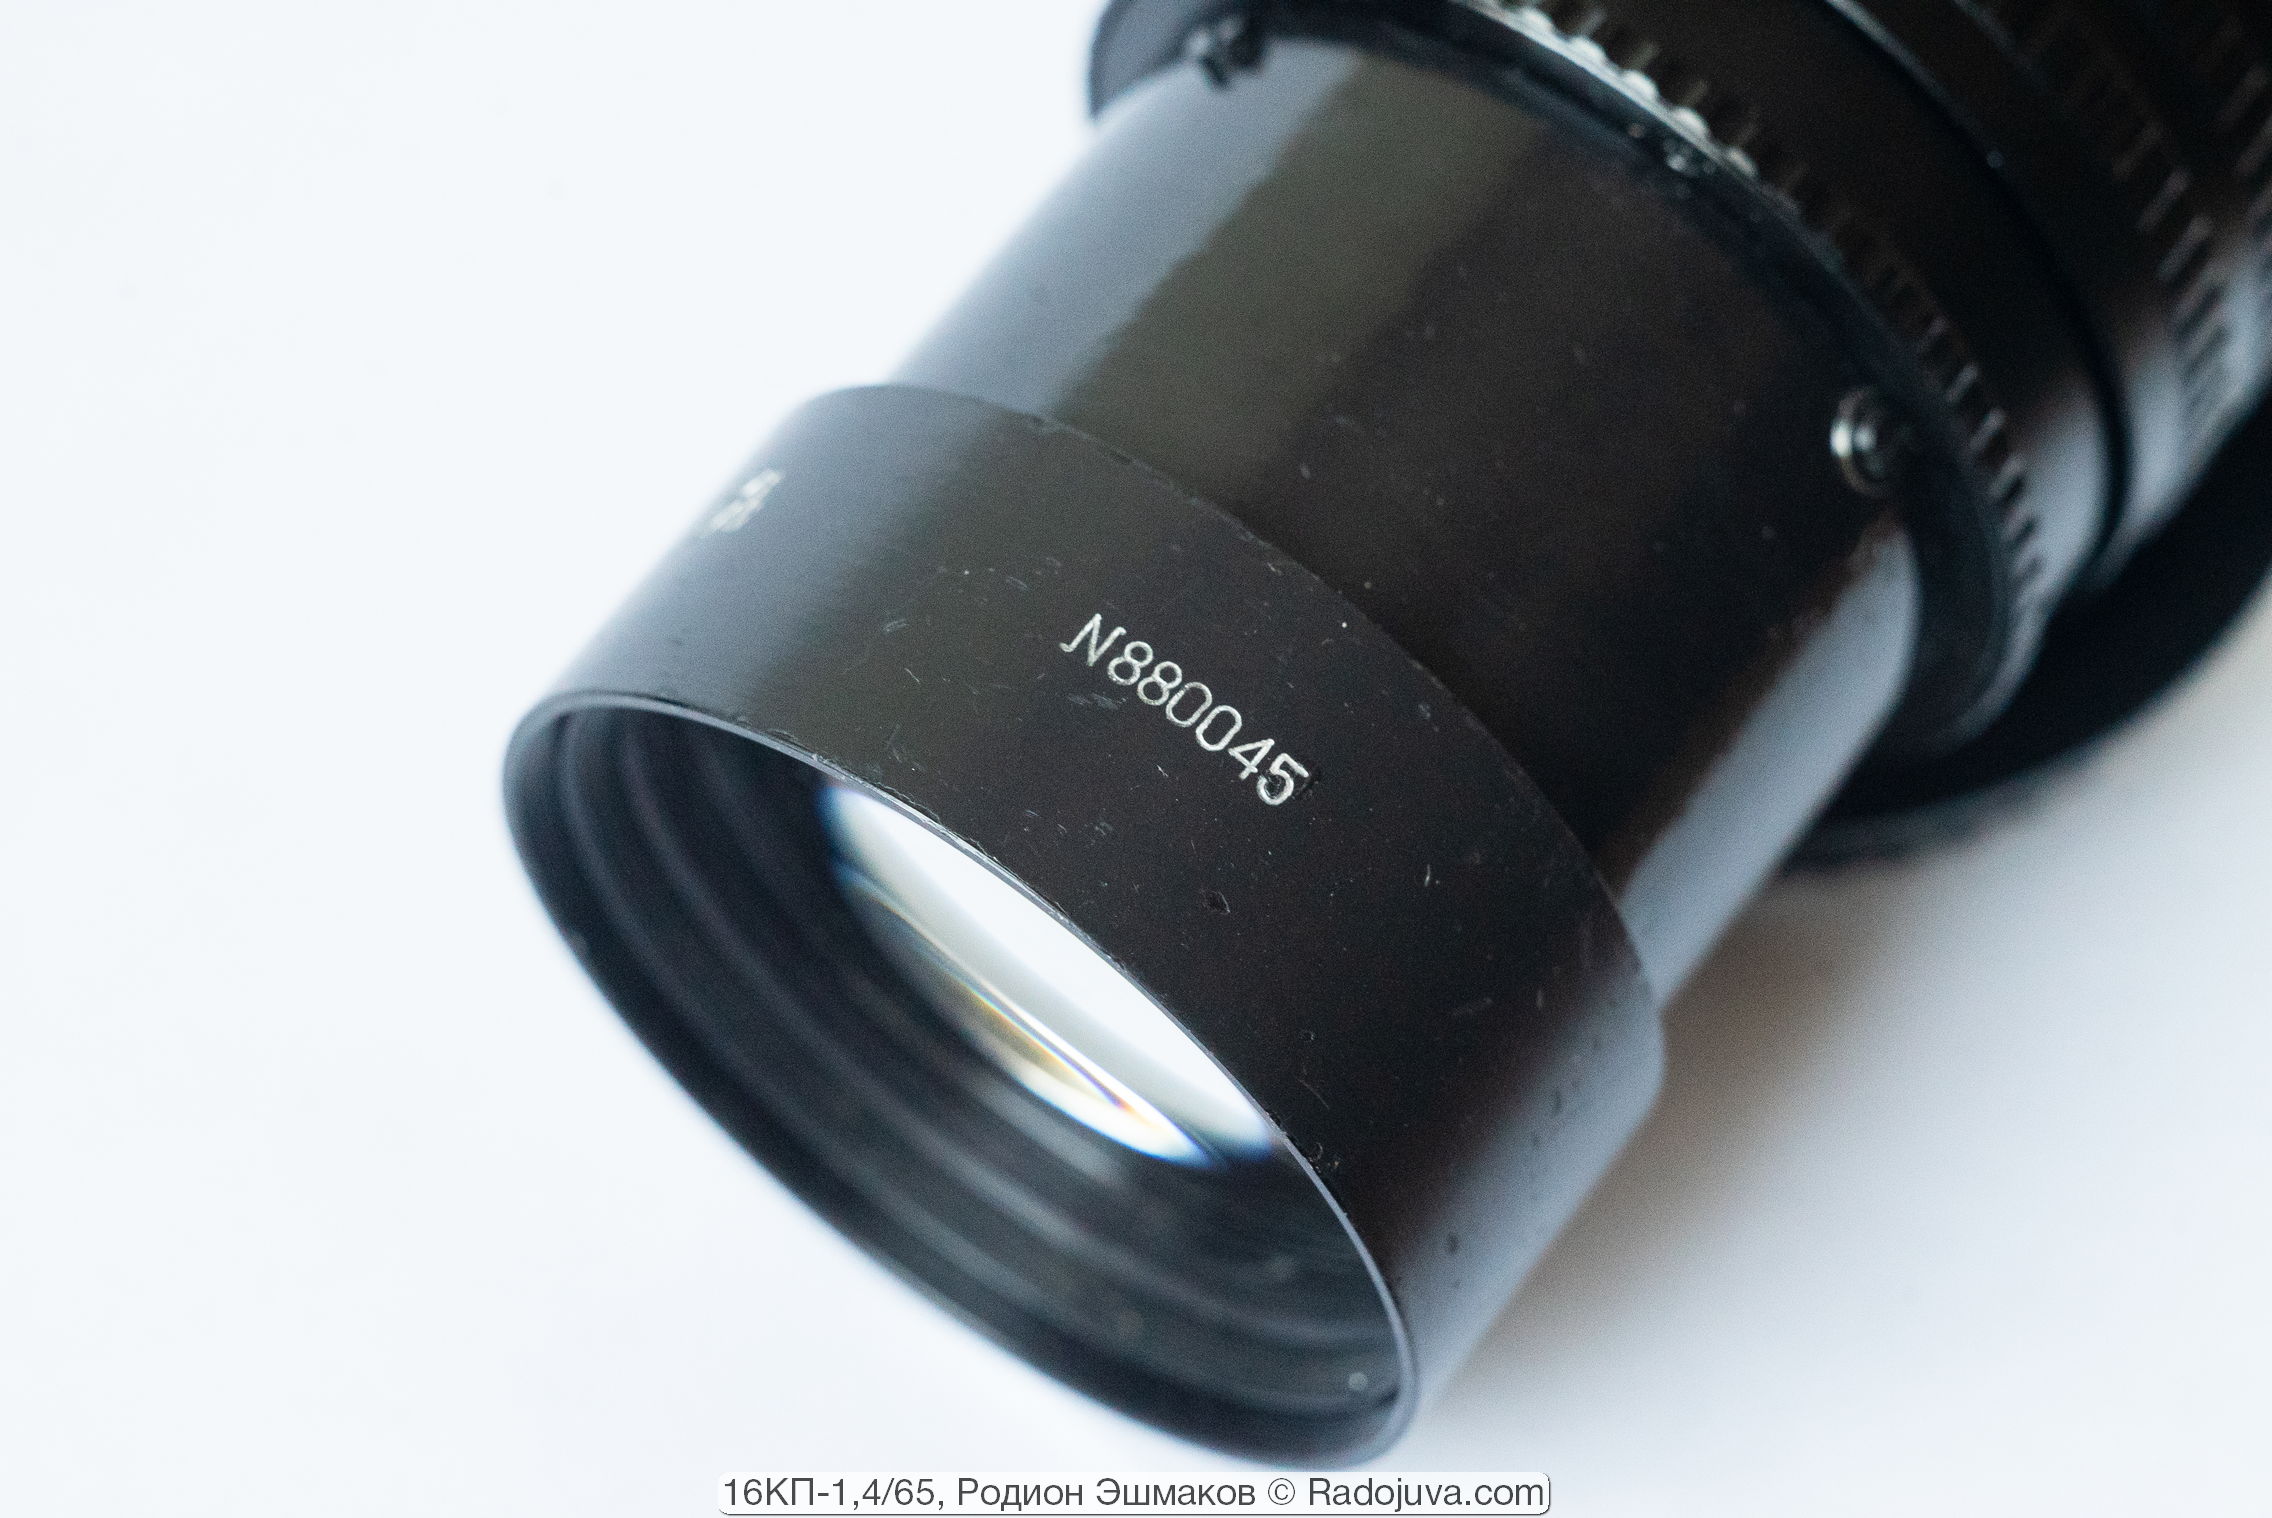 The massive front of the lens is marked with its name, emblem and serial number.